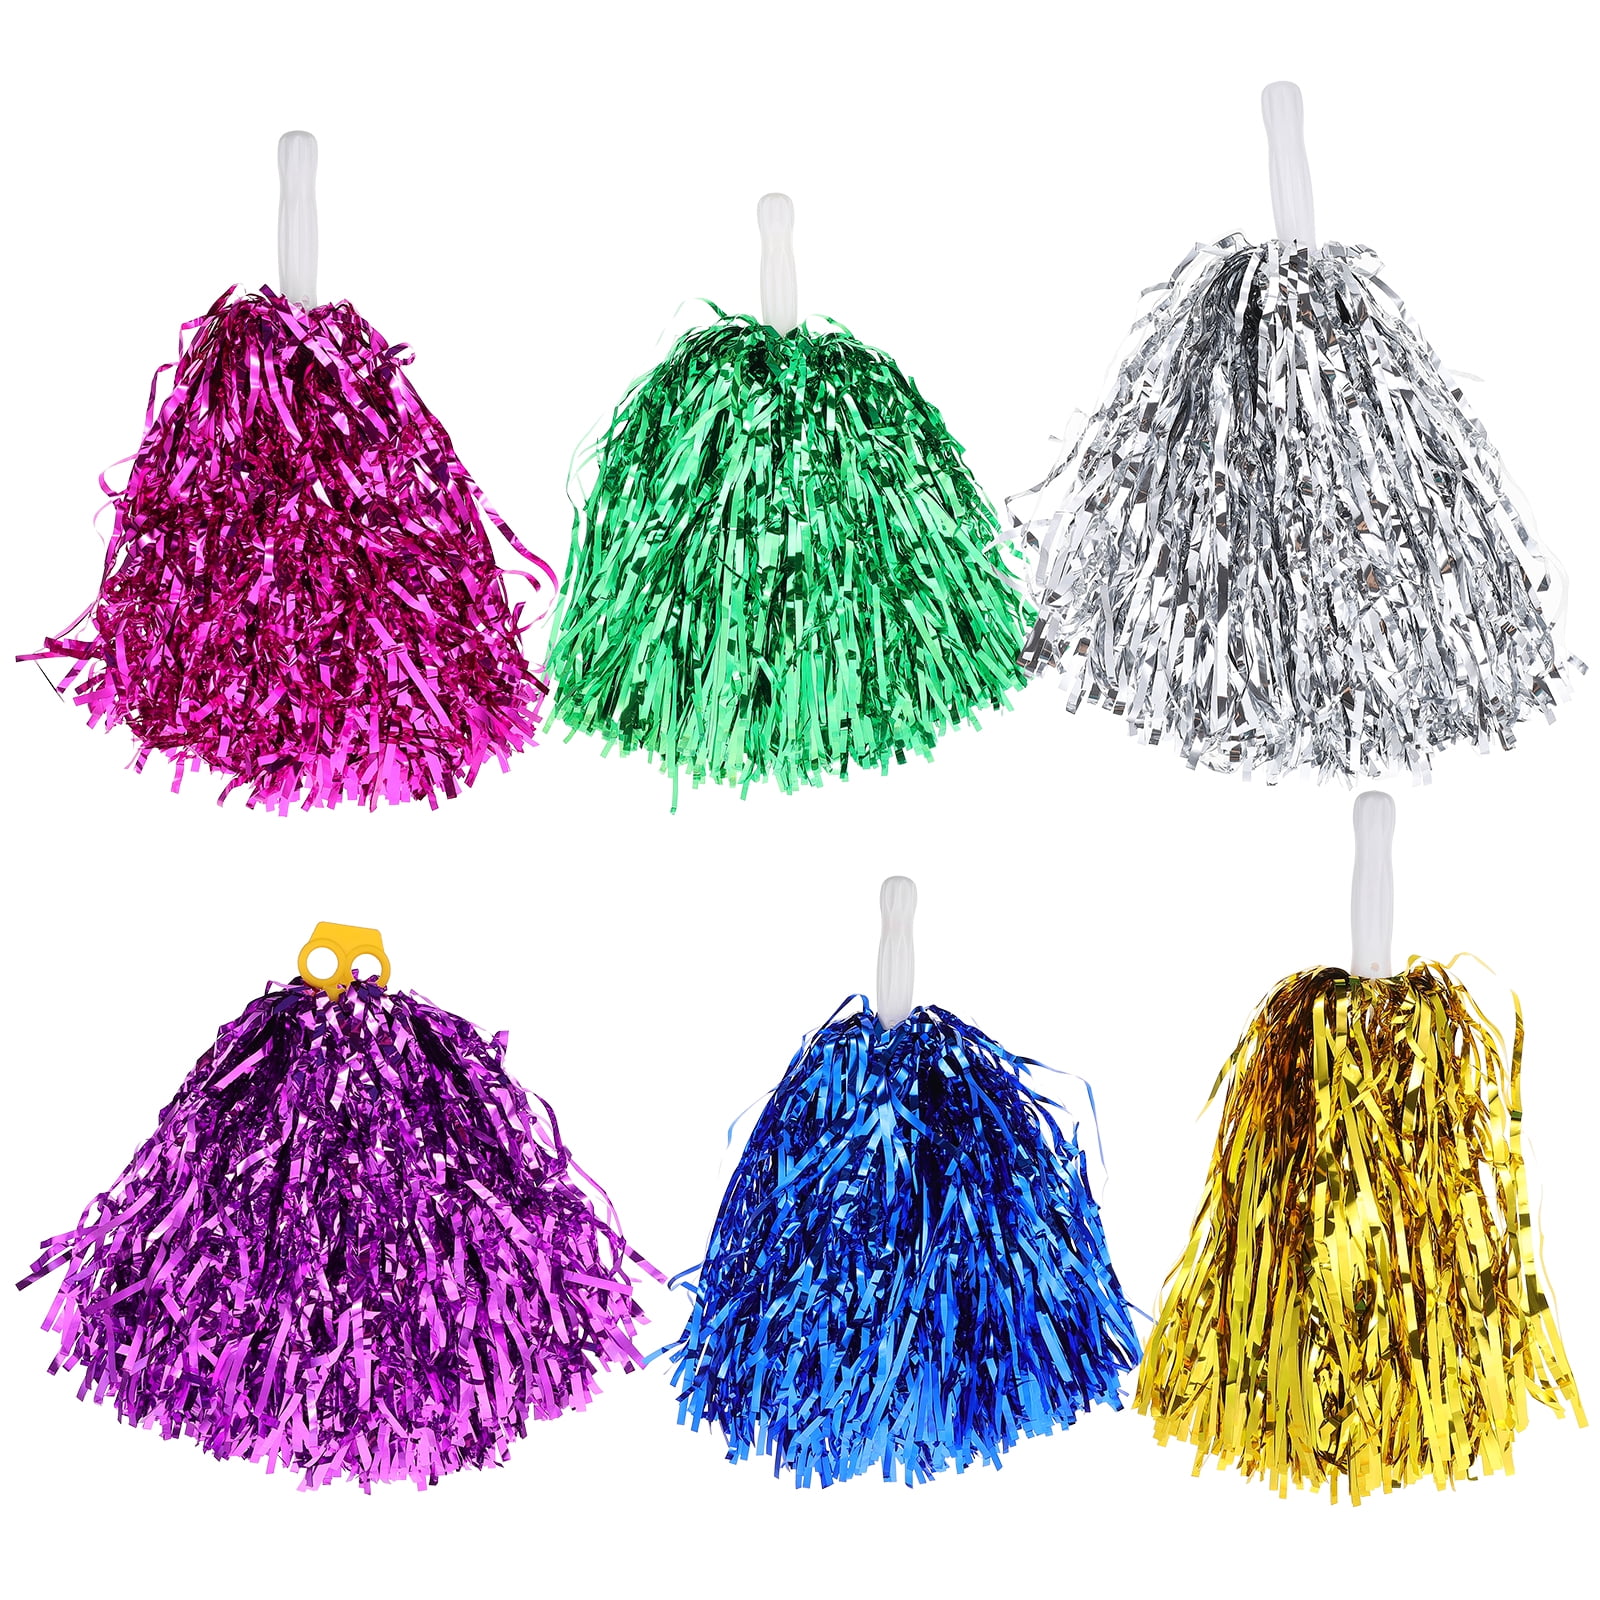  YOCOMEY 2Pcs Plastic Cheerleading Pom Poms with Baton Handle,  Premium Cheerleader Pompoms Kit, Cheering Hand Flowers for Sports Game Dance  Fancy Dress Night Party (Black/Yellow) : Sports & Outdoors